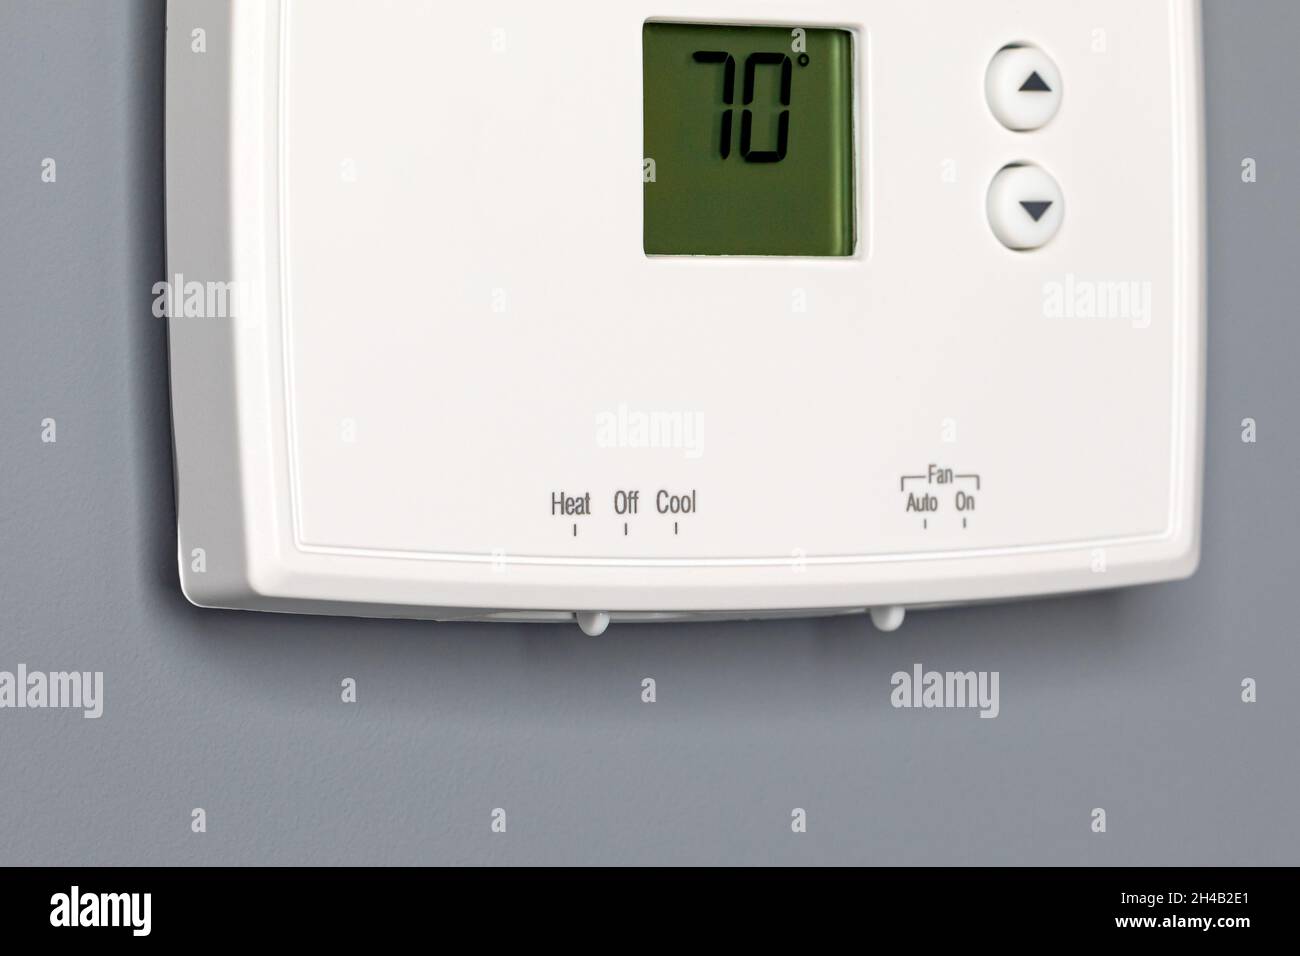 https://c8.alamy.com/comp/2H4B2E1/thermostat-for-home-furnace-and-air-conditioner-utility-bill-savings-energy-cost-and-conservation-concept-2H4B2E1.jpg